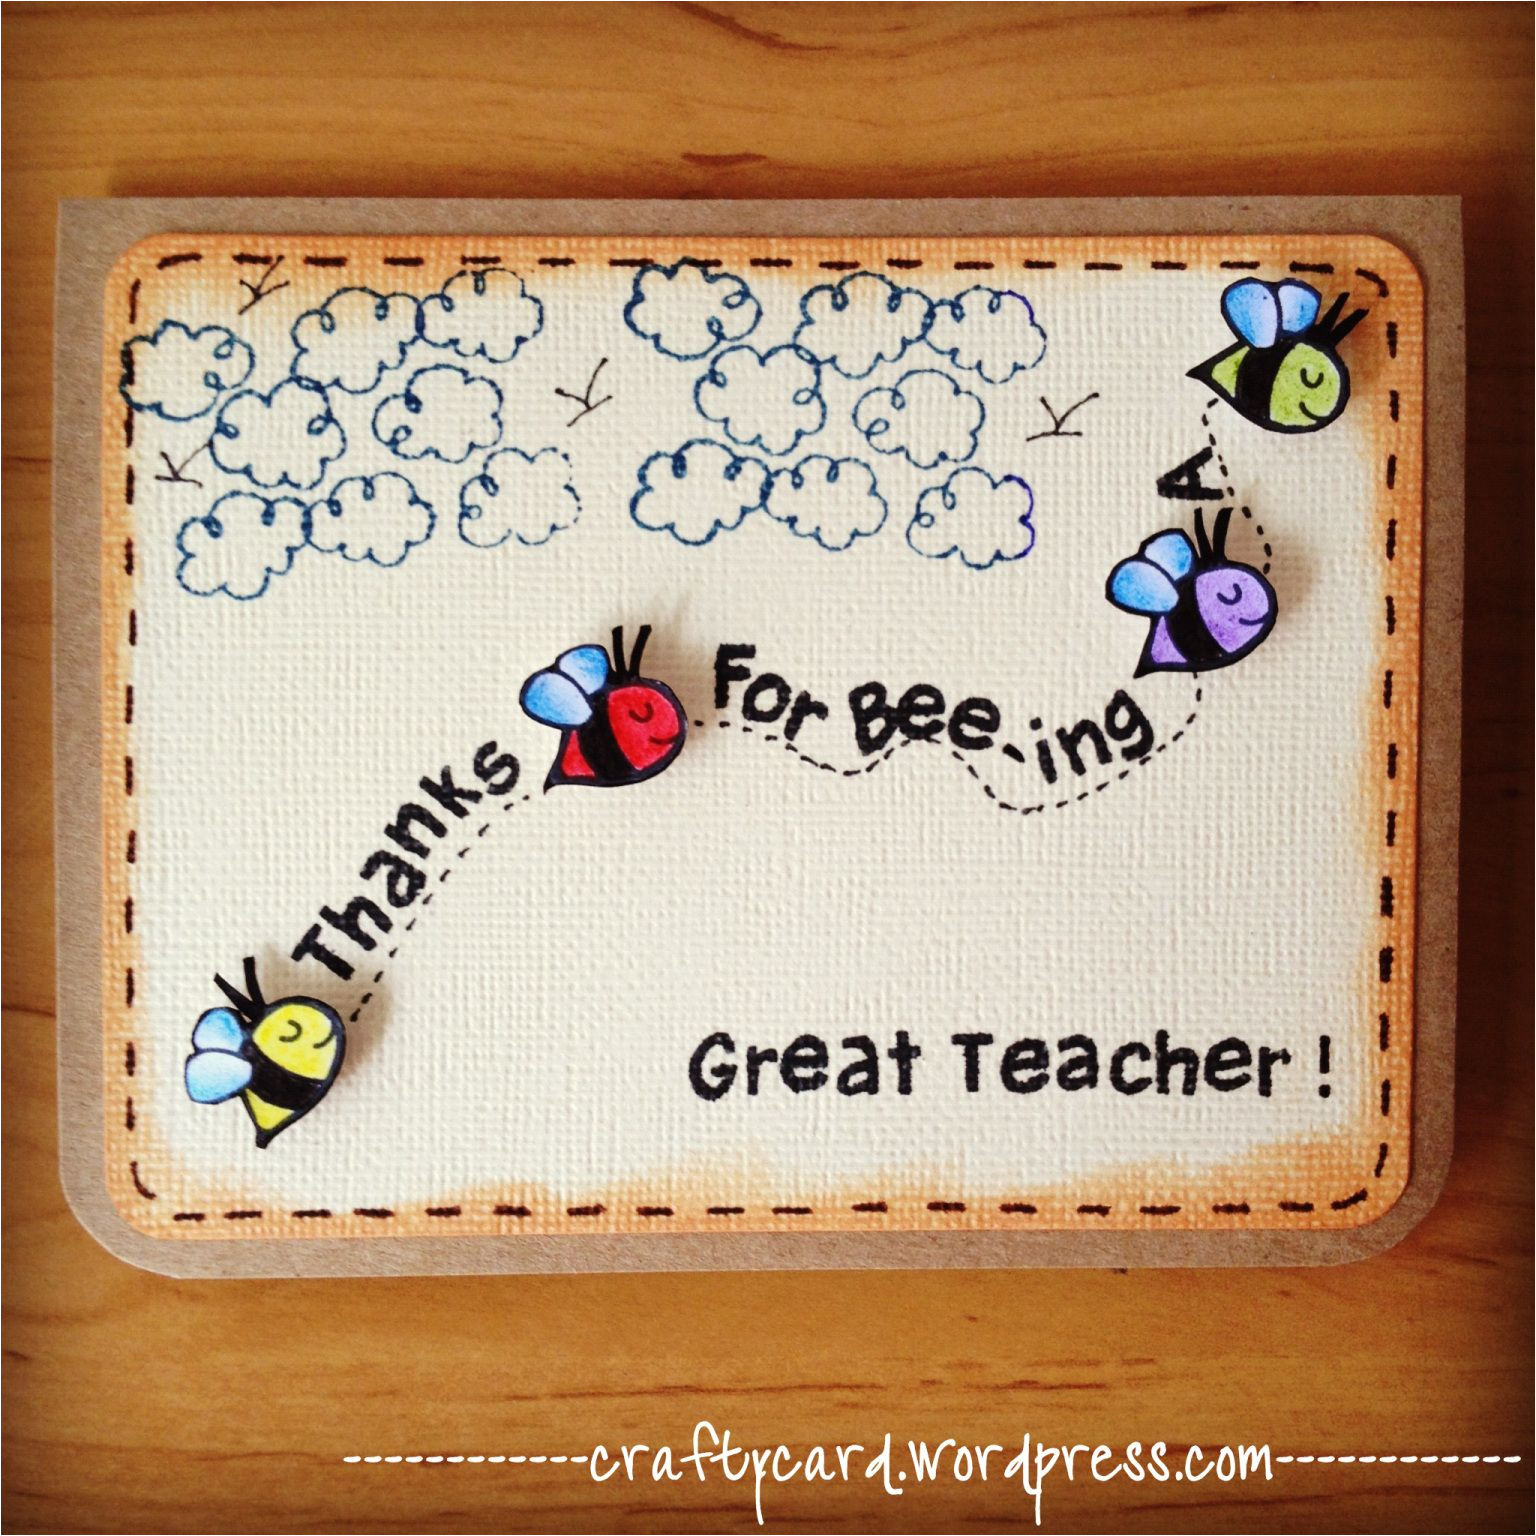 Photos Of Teachers Day Card M203 Thanks for Bee Ing A Great Teacher with Images